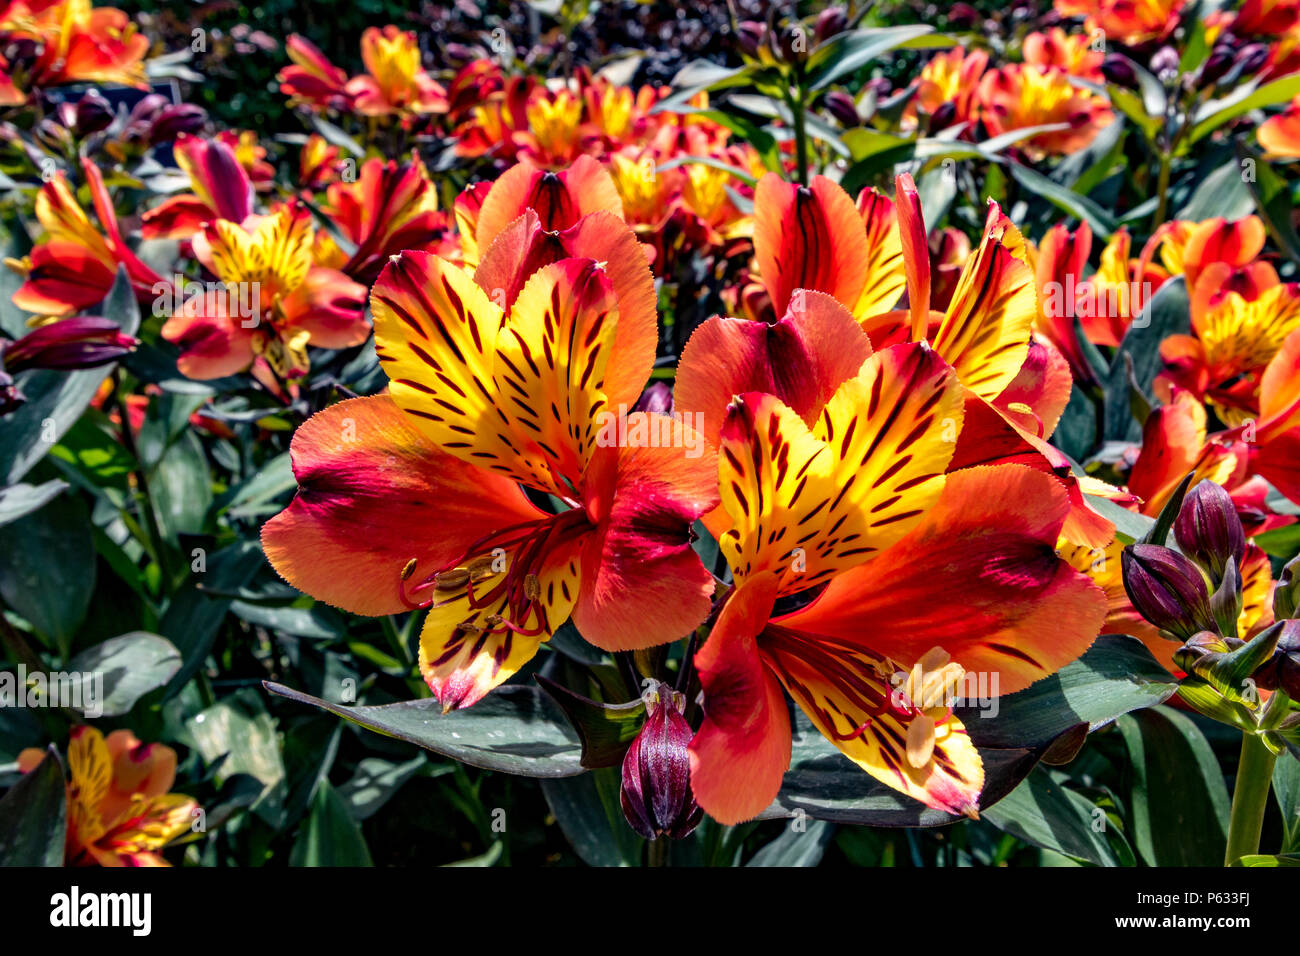 Peruvian lily , Alstroemeria Indian Summer Tesronto , a herbaceous perennial with funnel-shaped ,orange and yellow flowers, UK Stock Photo